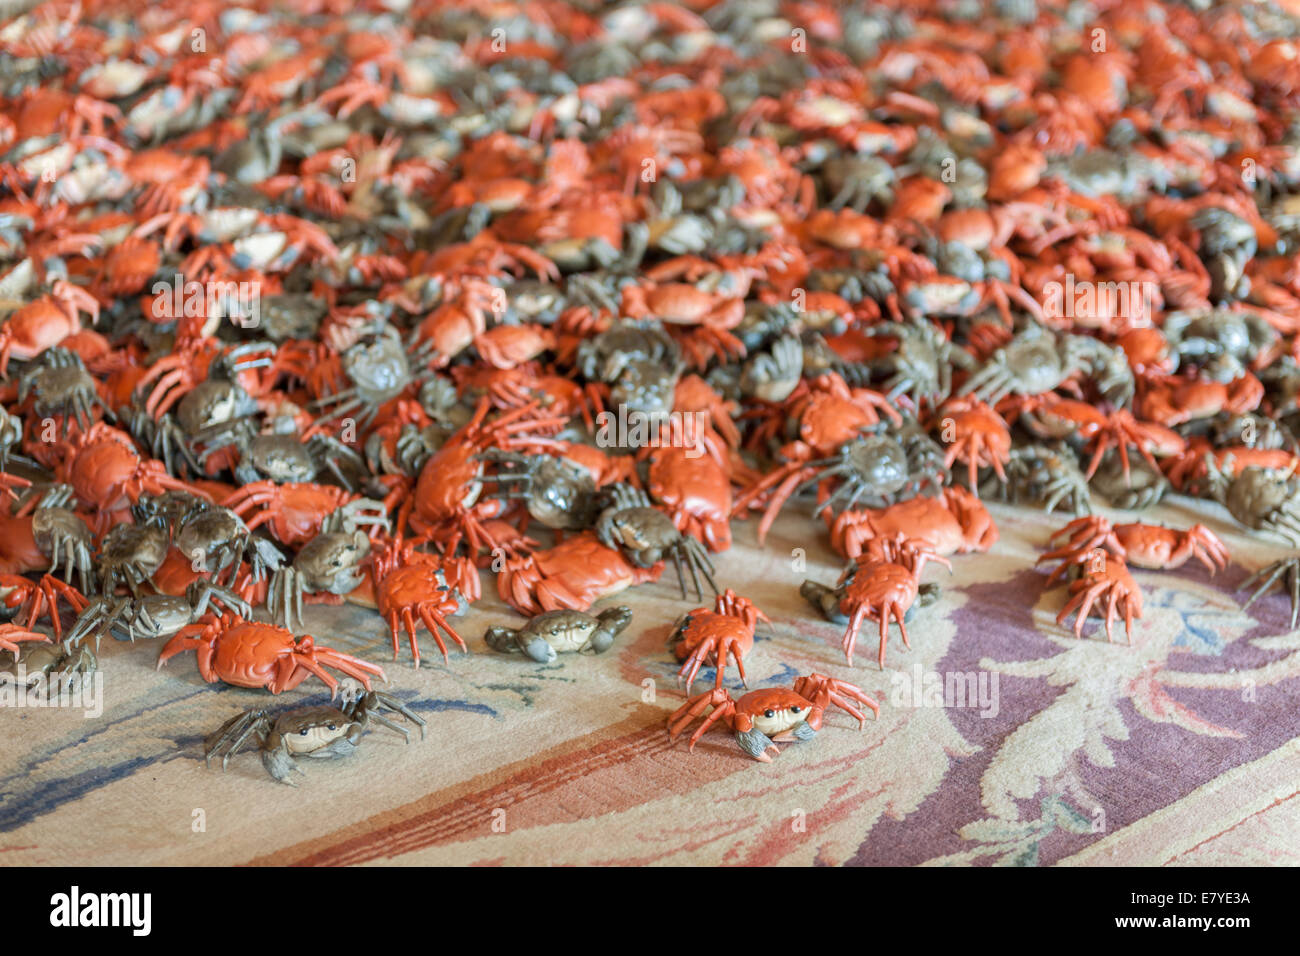 Woodstock, Oxfordshire, UK, Friday 26th September 2014 Preview of Ai Weiwei at Blenheim Palace, Blenheim Art Foundation's inaugural exhibition, opening to the public on 1st October 2014 He Xie porcelain crabs © Nikreates/Alamy Stock Photo